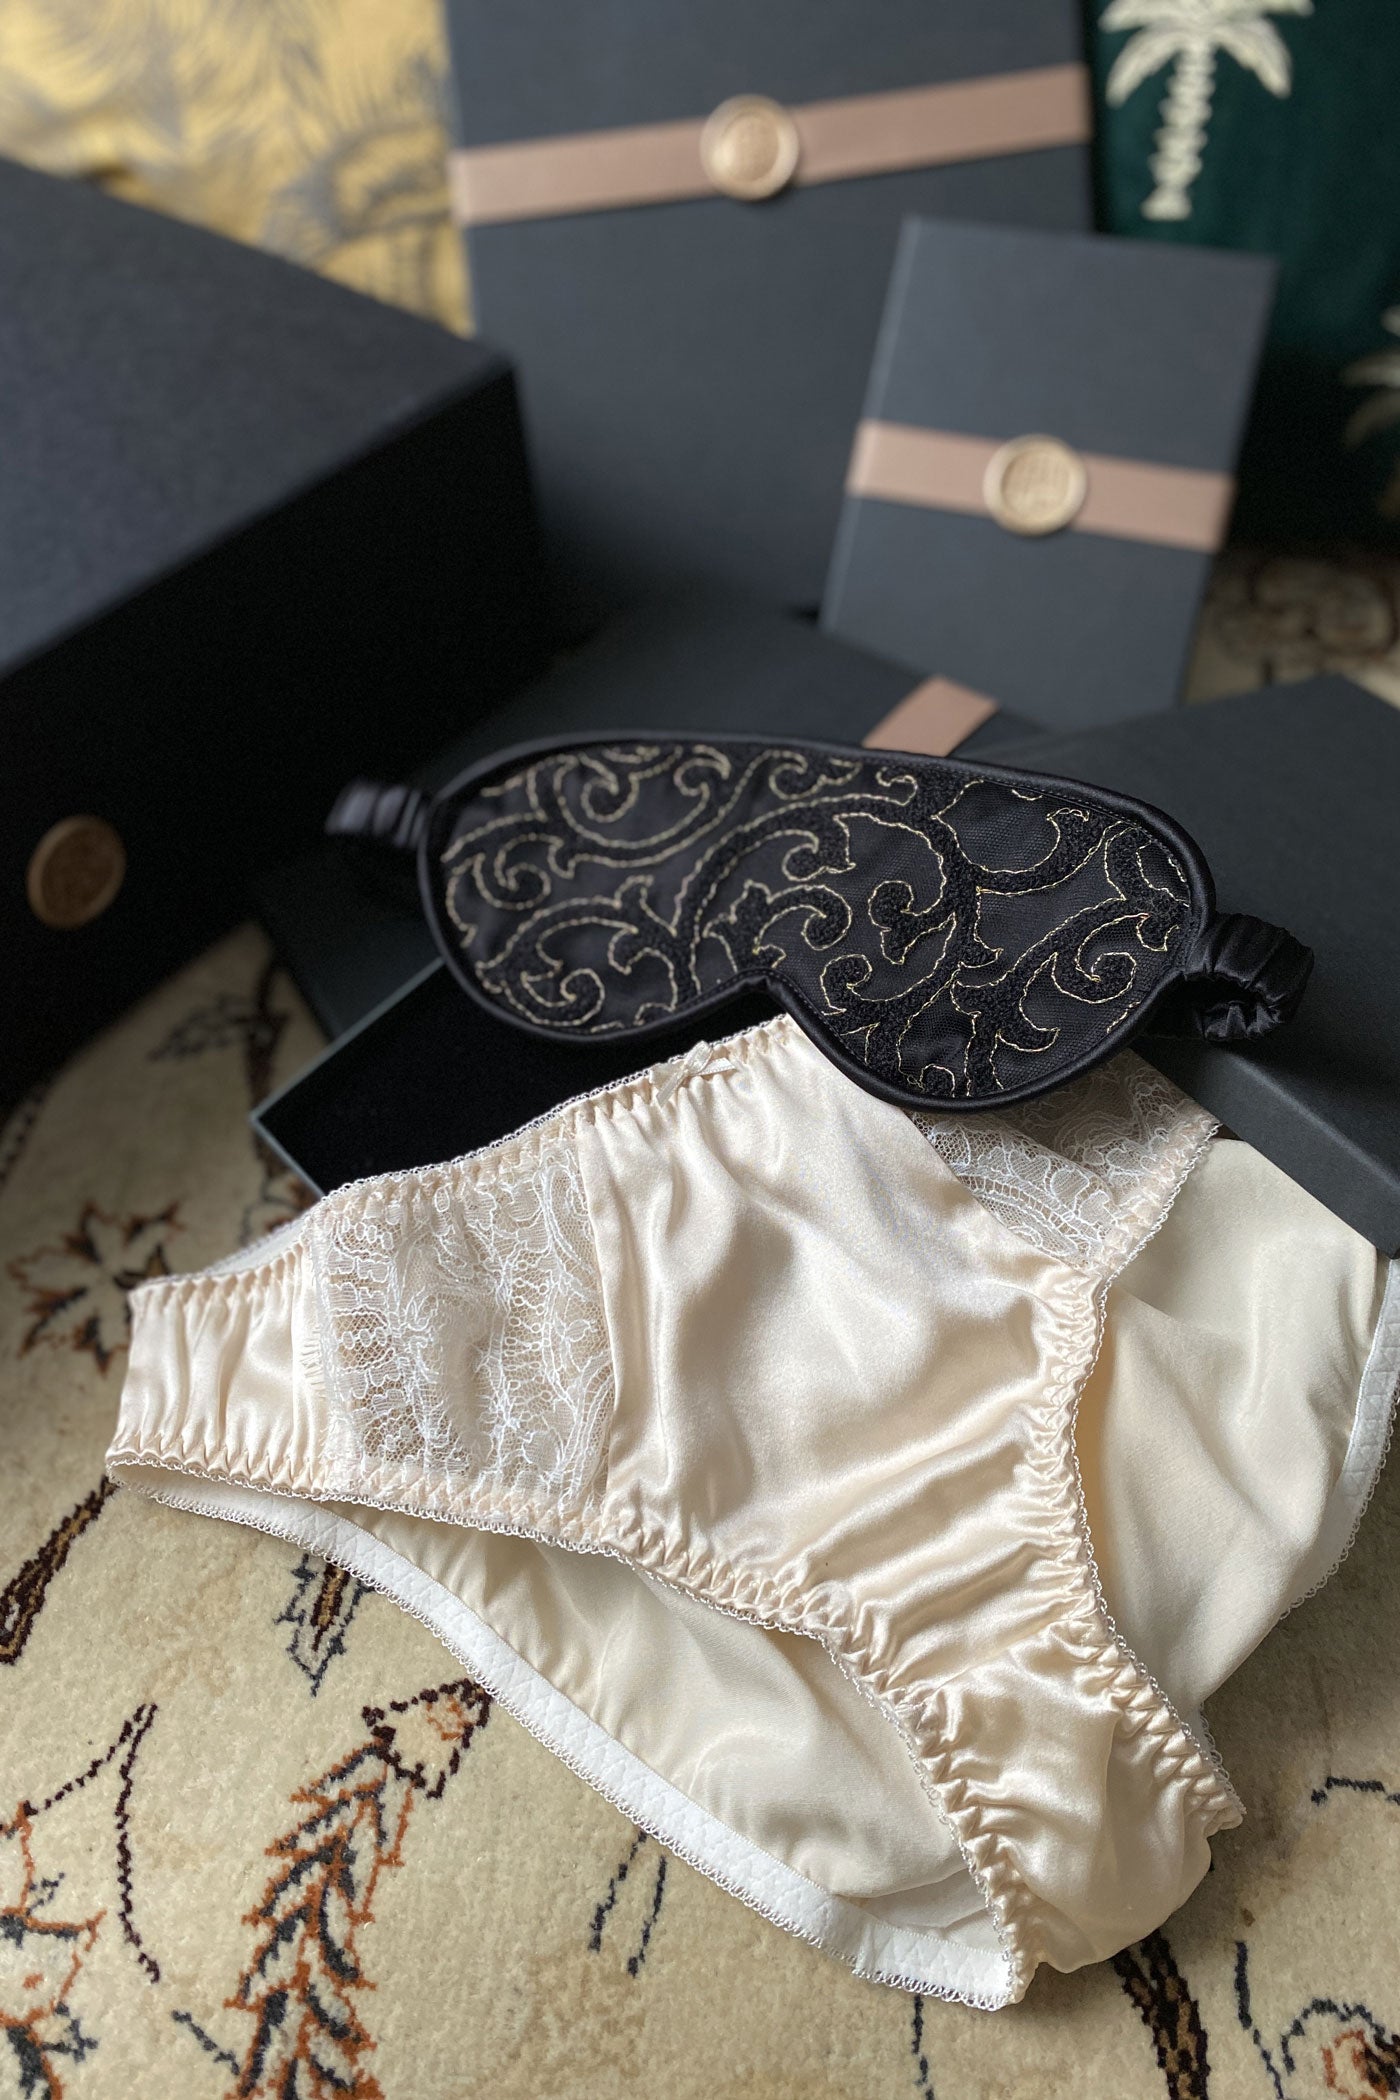 Silk and lace briefs with luxury eye mask and gift boxes